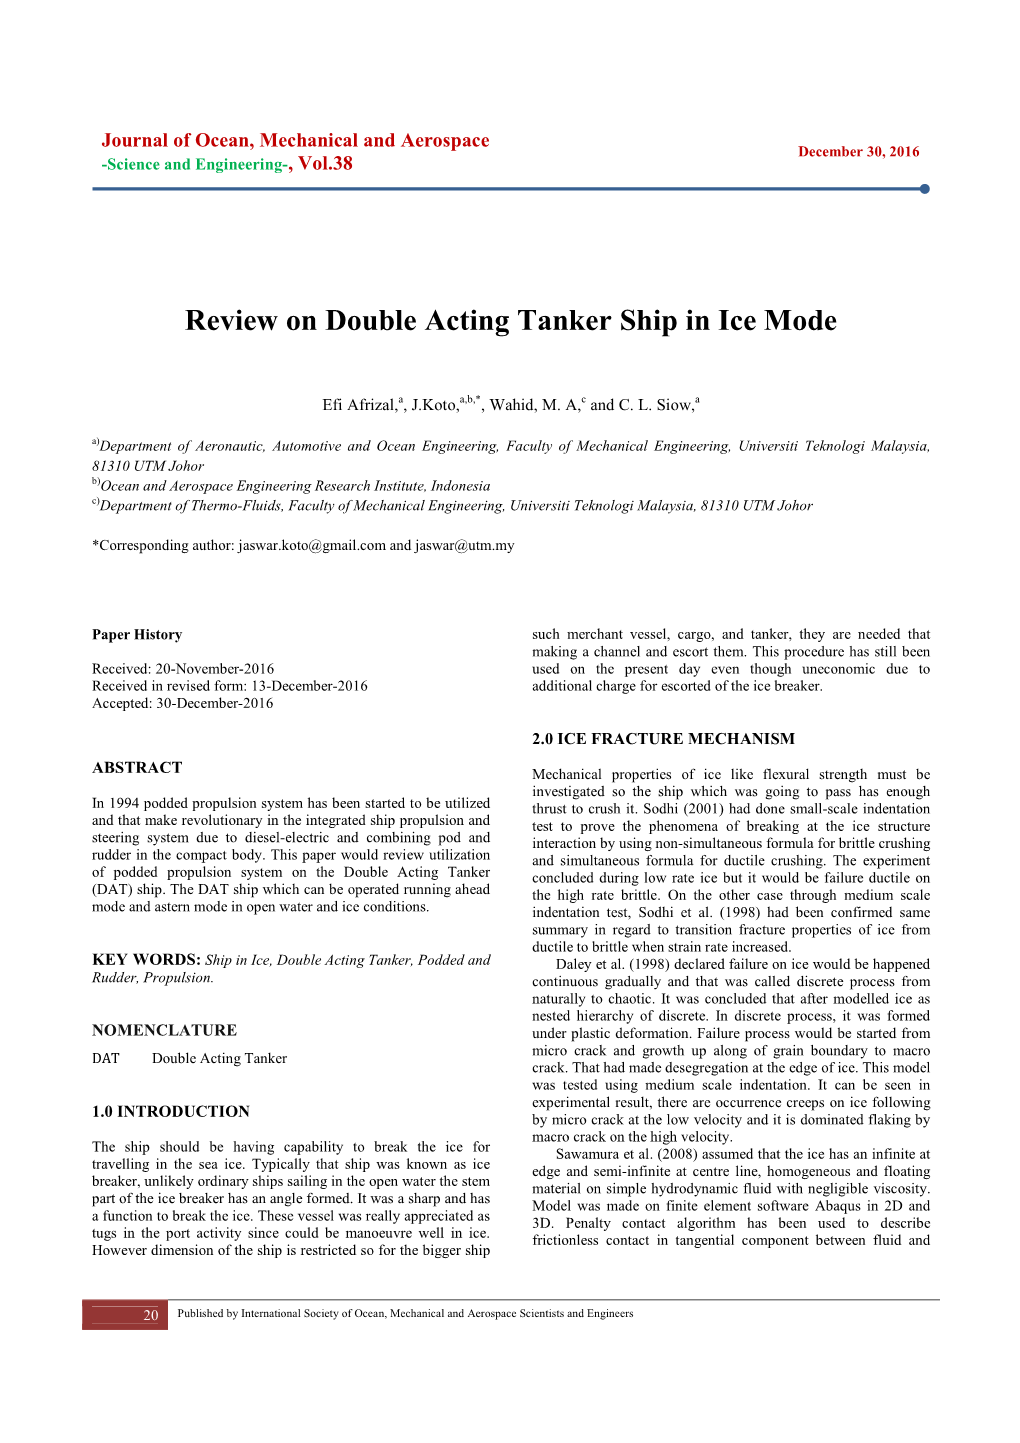 Review on Double Acting Tanker Ship in Ice Mode